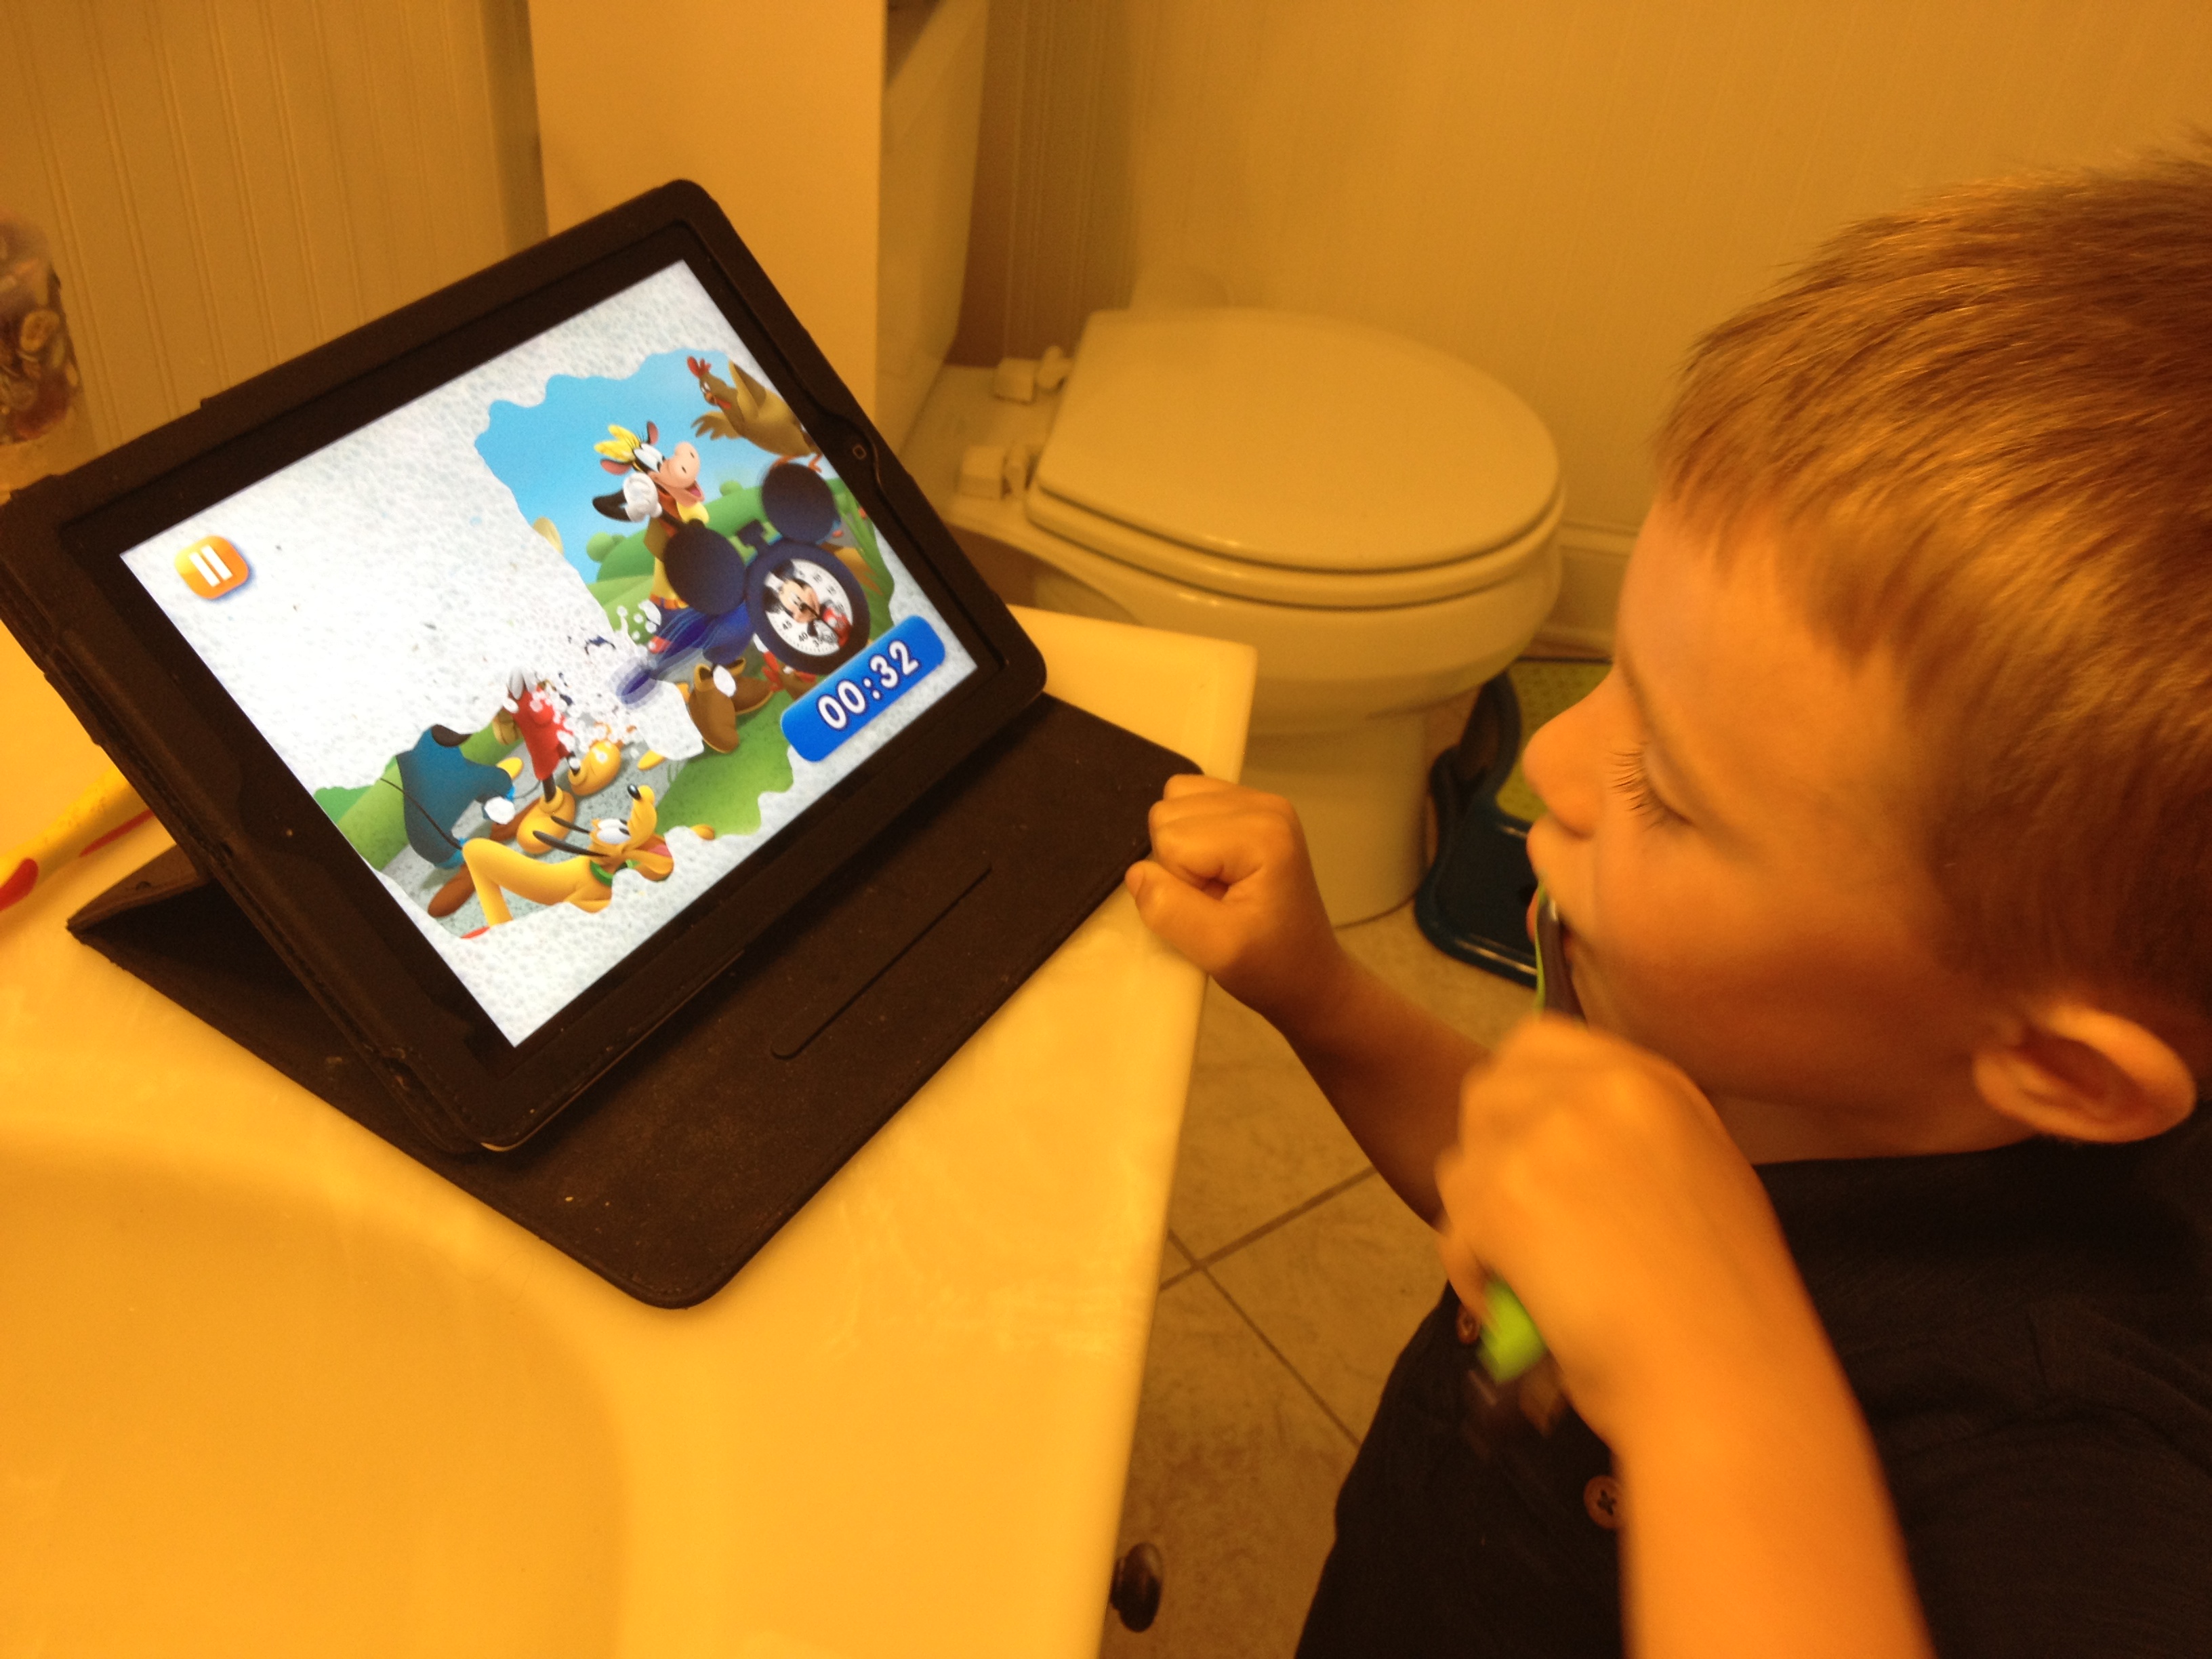 As your child brushes their teeth, an onscreen toothbrush brushes away bubbles to reveal a Disney themed picture!